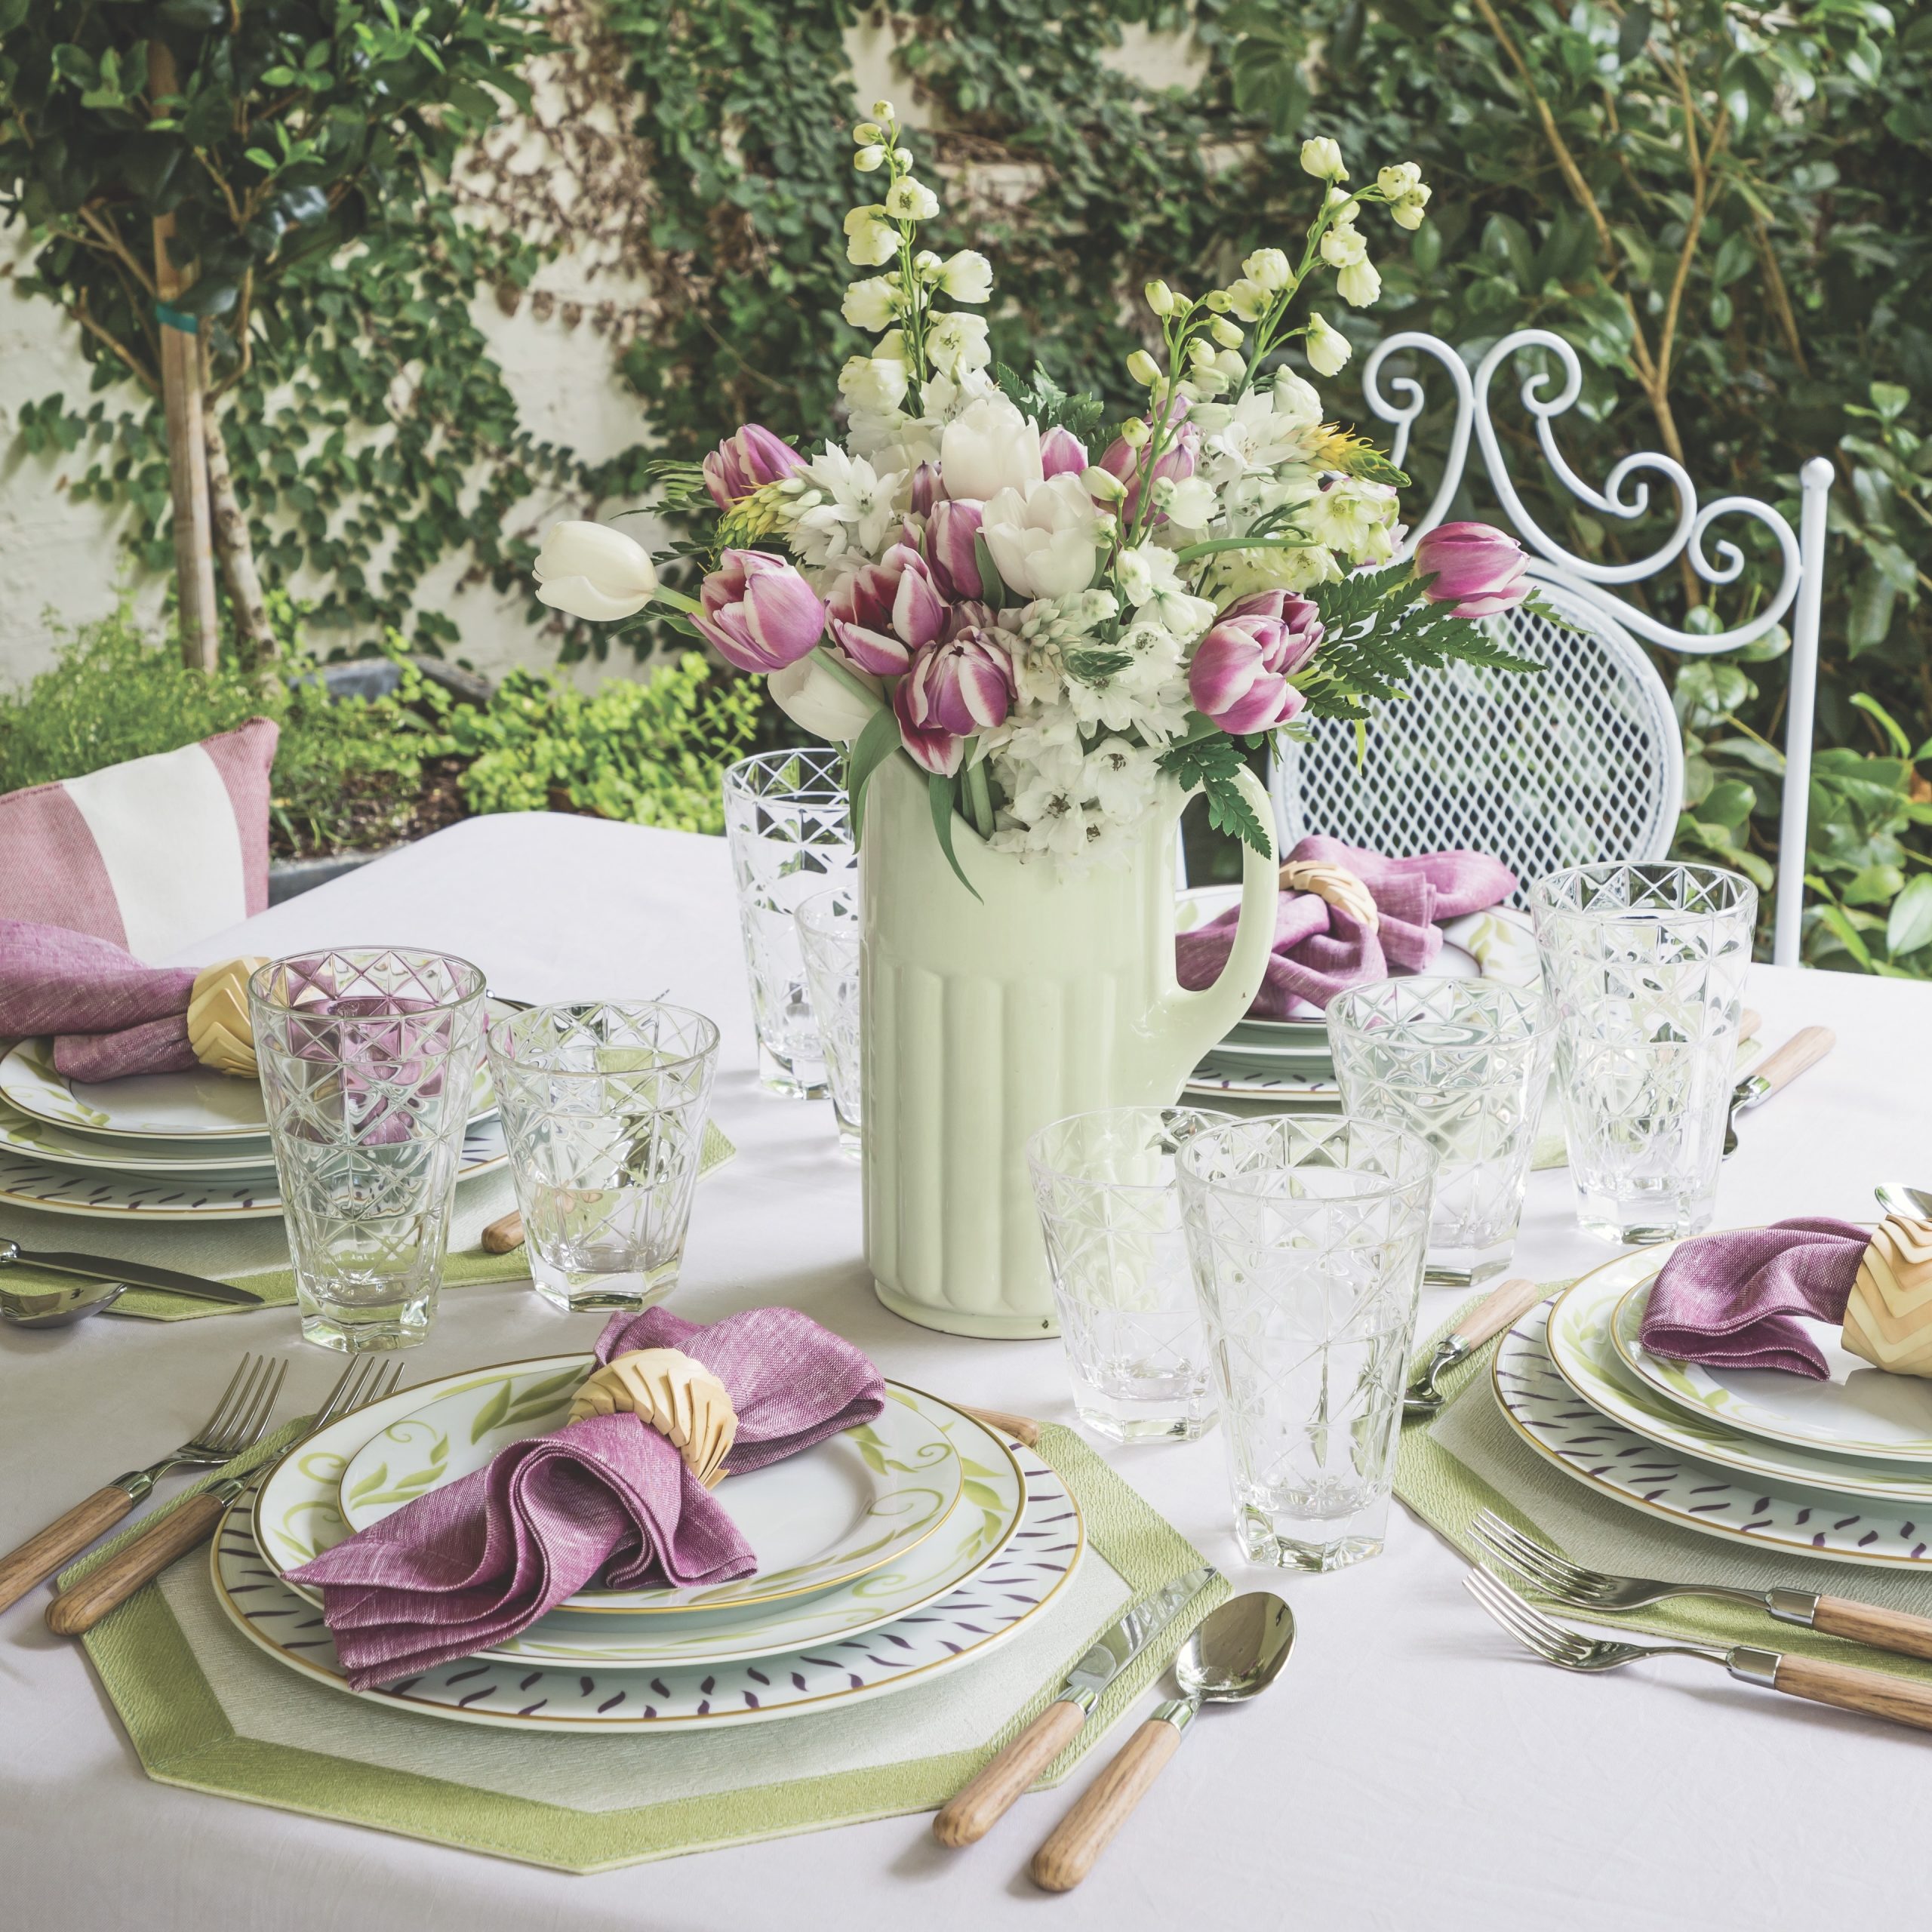 5 Gorgeous Green Tabletop Looks